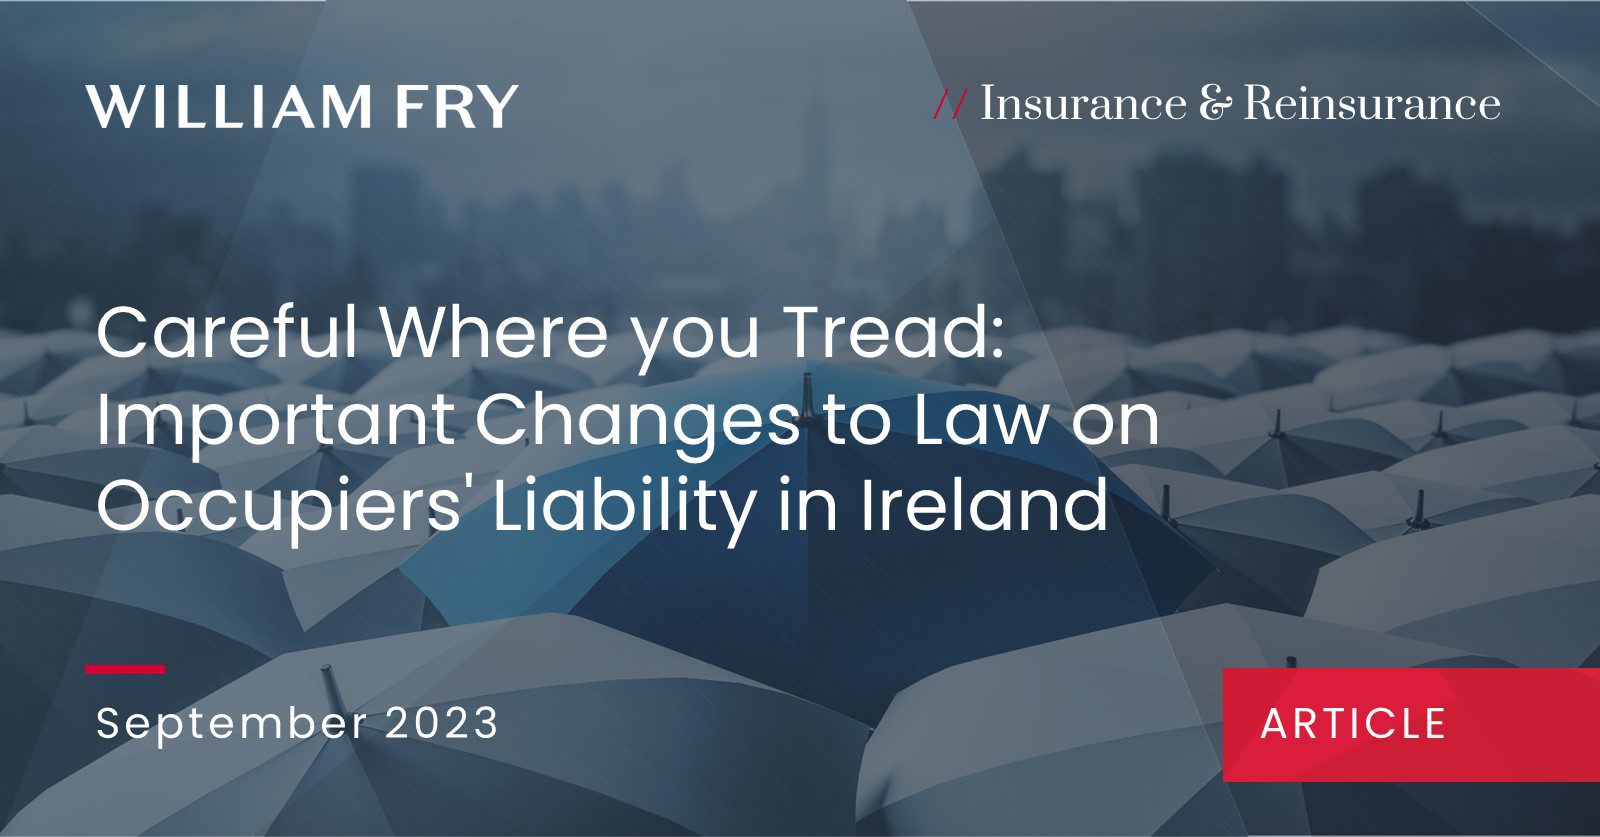 Careful Where you Tread: Important Changes to Law on Occupiers' Liability in Ireland